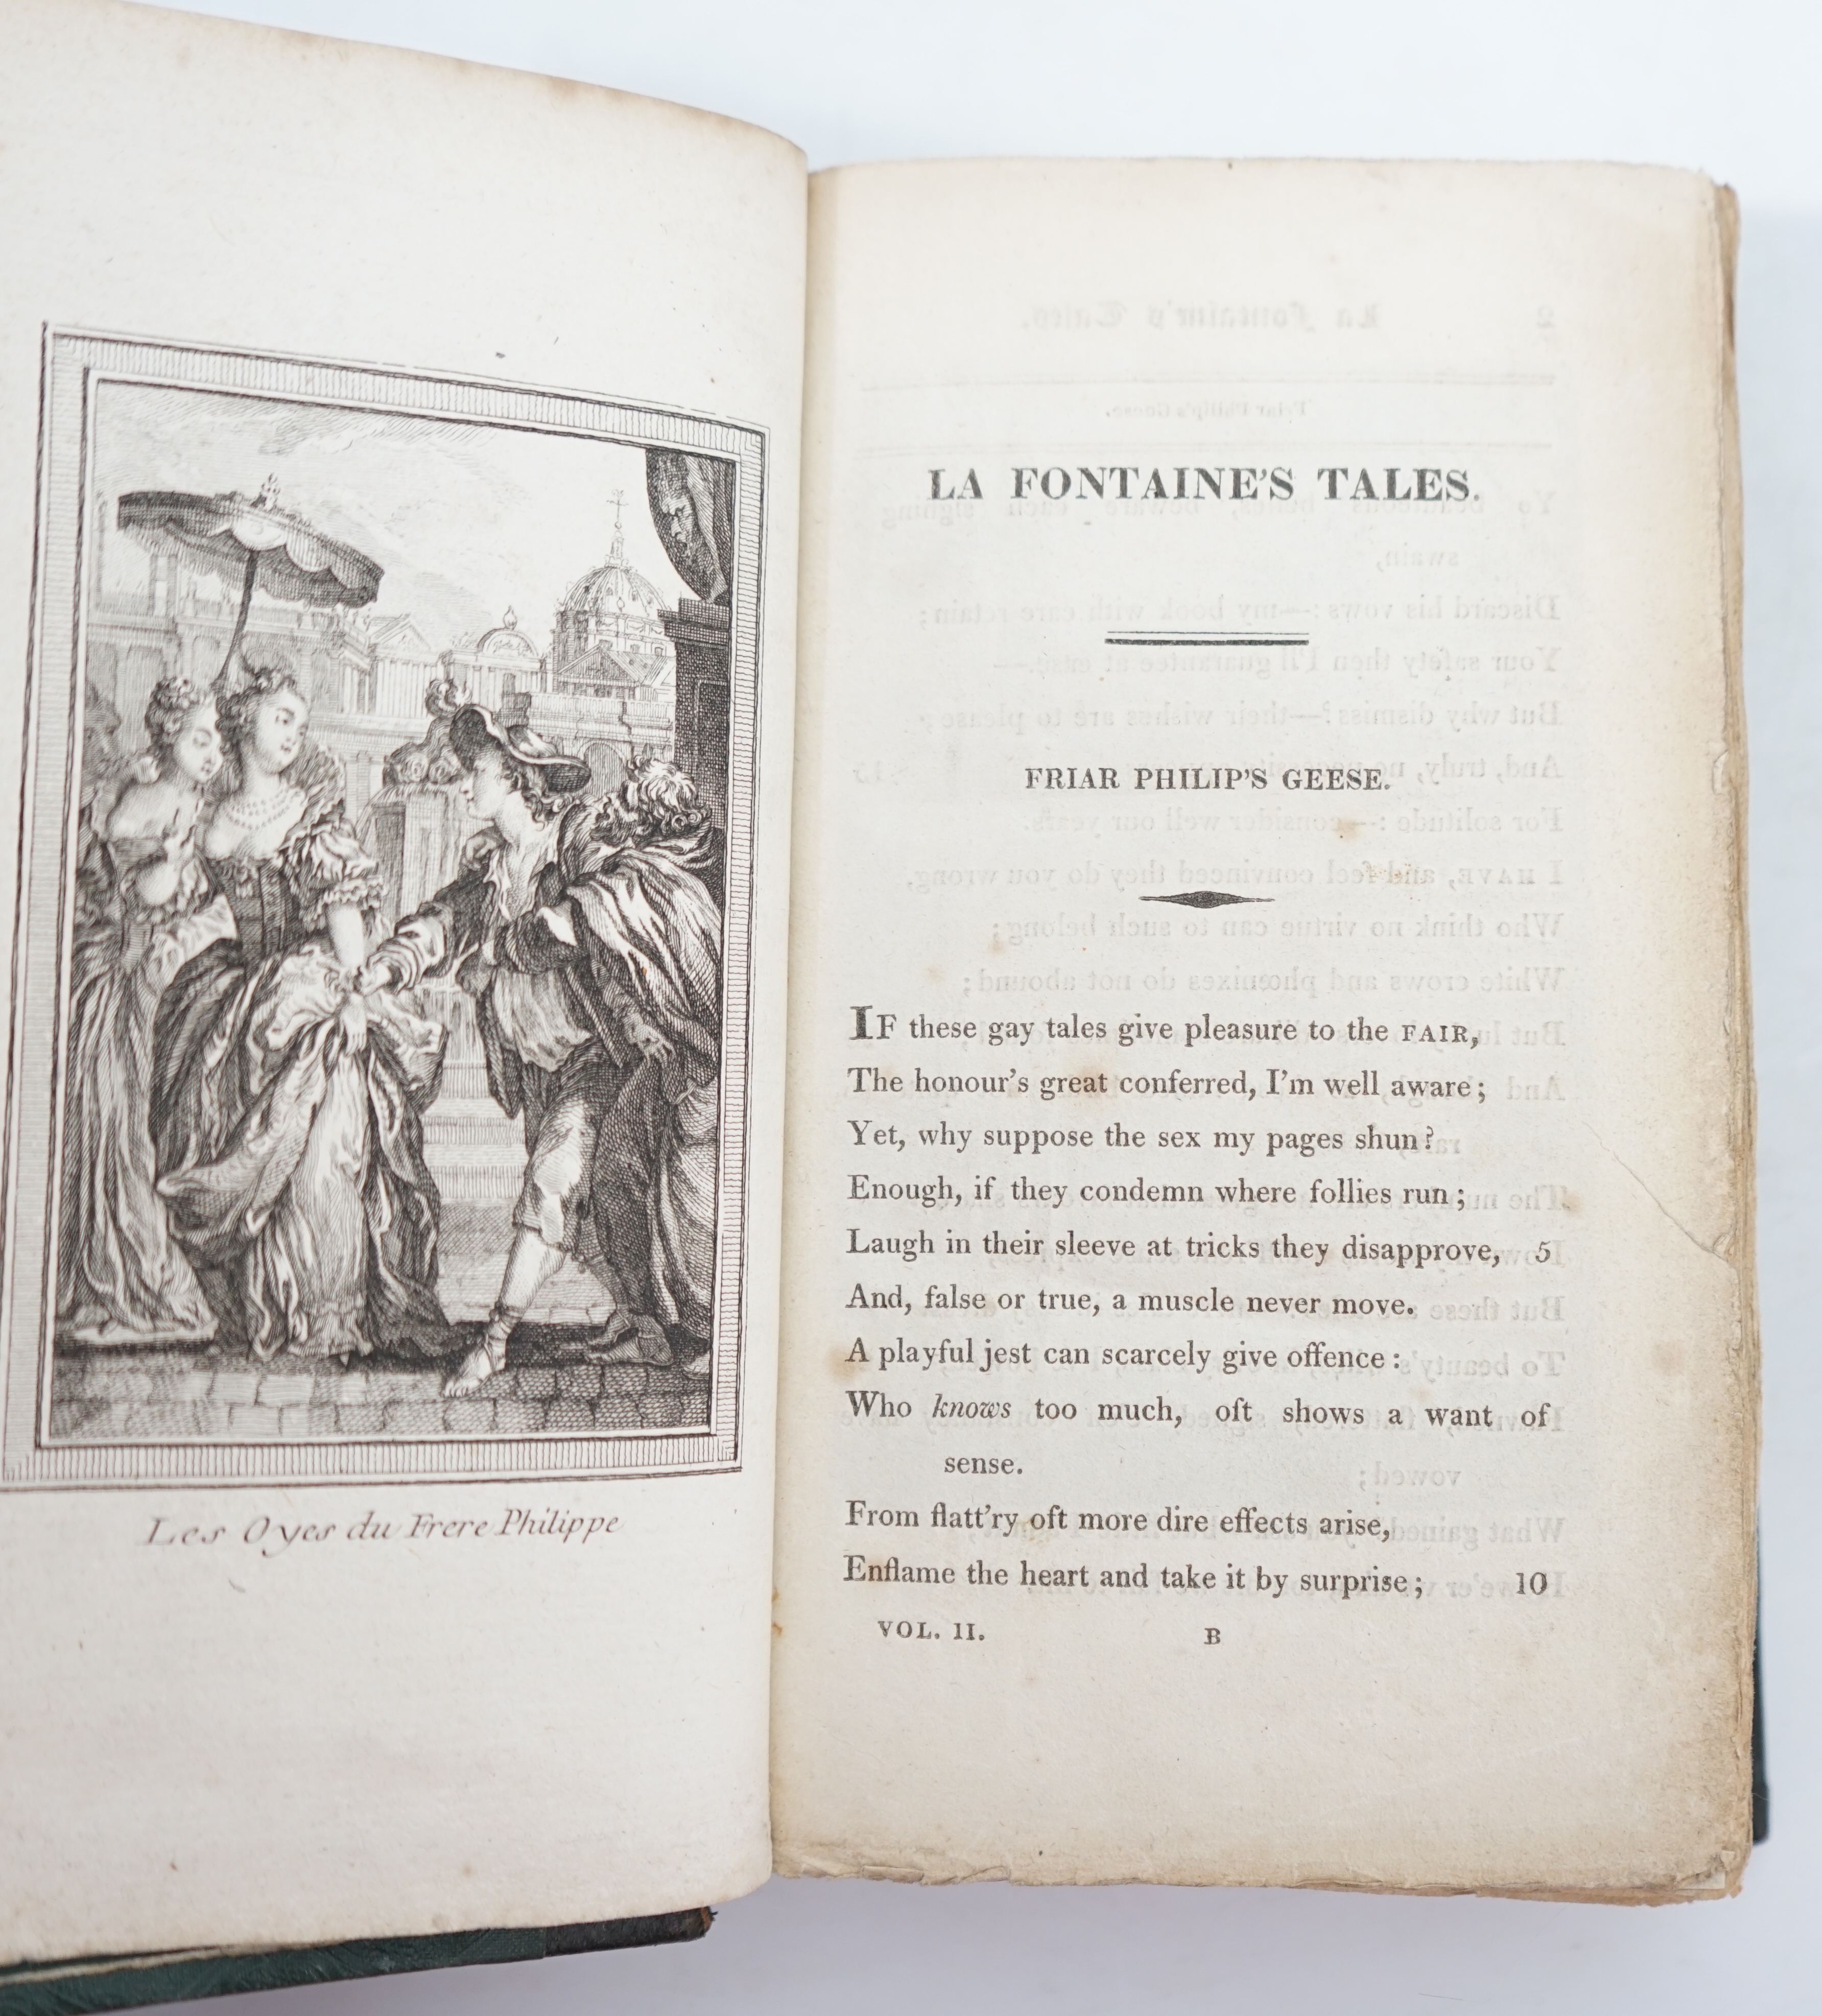 La Fontaine, Jean de - La Fontaine’s Tales: Imitated in English Verse, 2 vols, 12mo, half green morocco with blind stamped cloth boards, first complete edition in English, with engraved portrait frontispiece and extra il